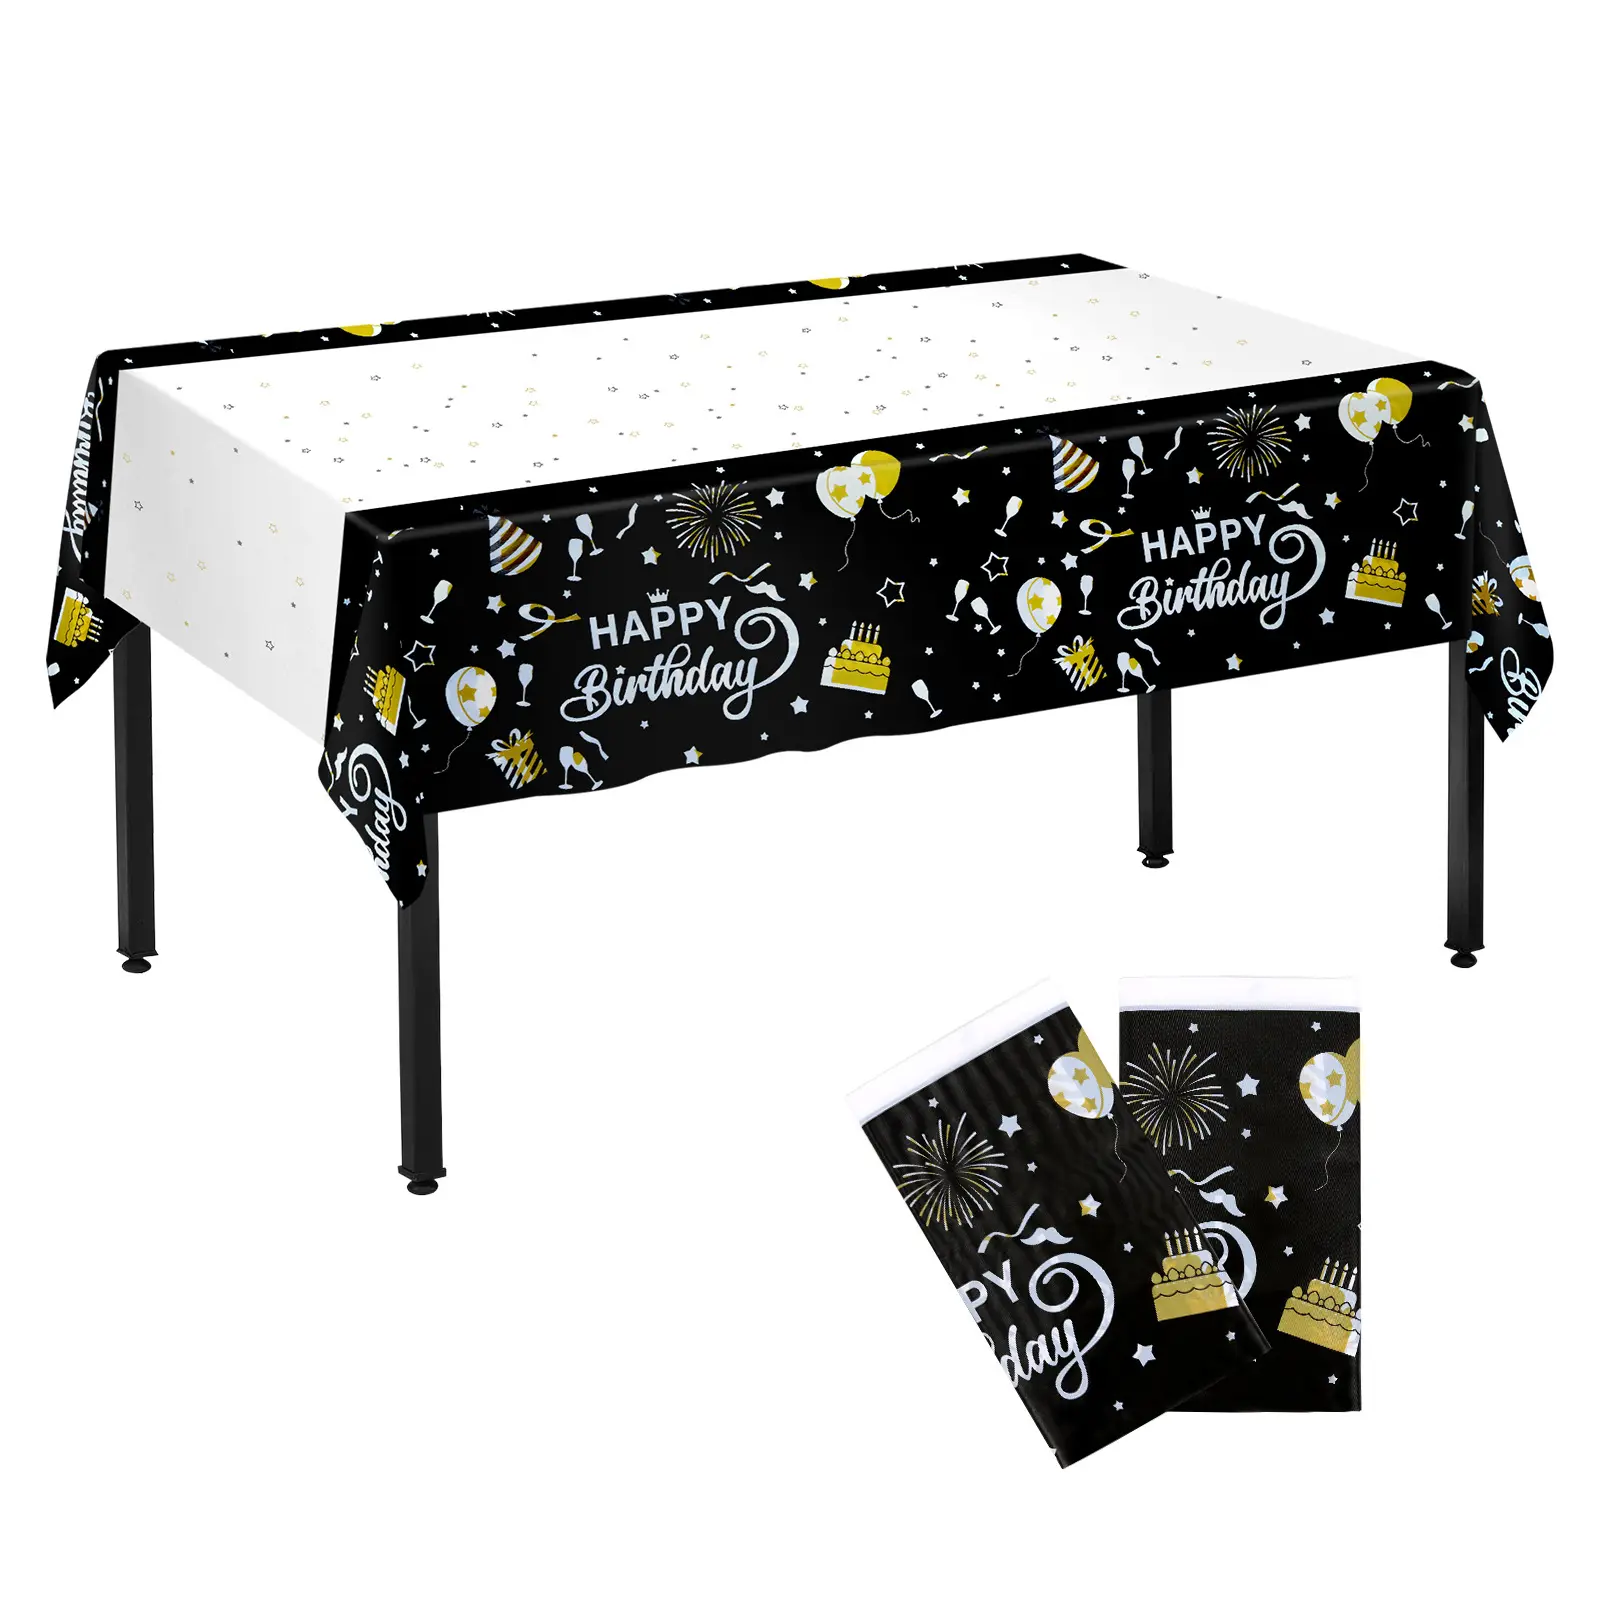 Happy Birthday theme Disposable tablecloth print party decorative tablecloth PEVA tablecloth waterproof